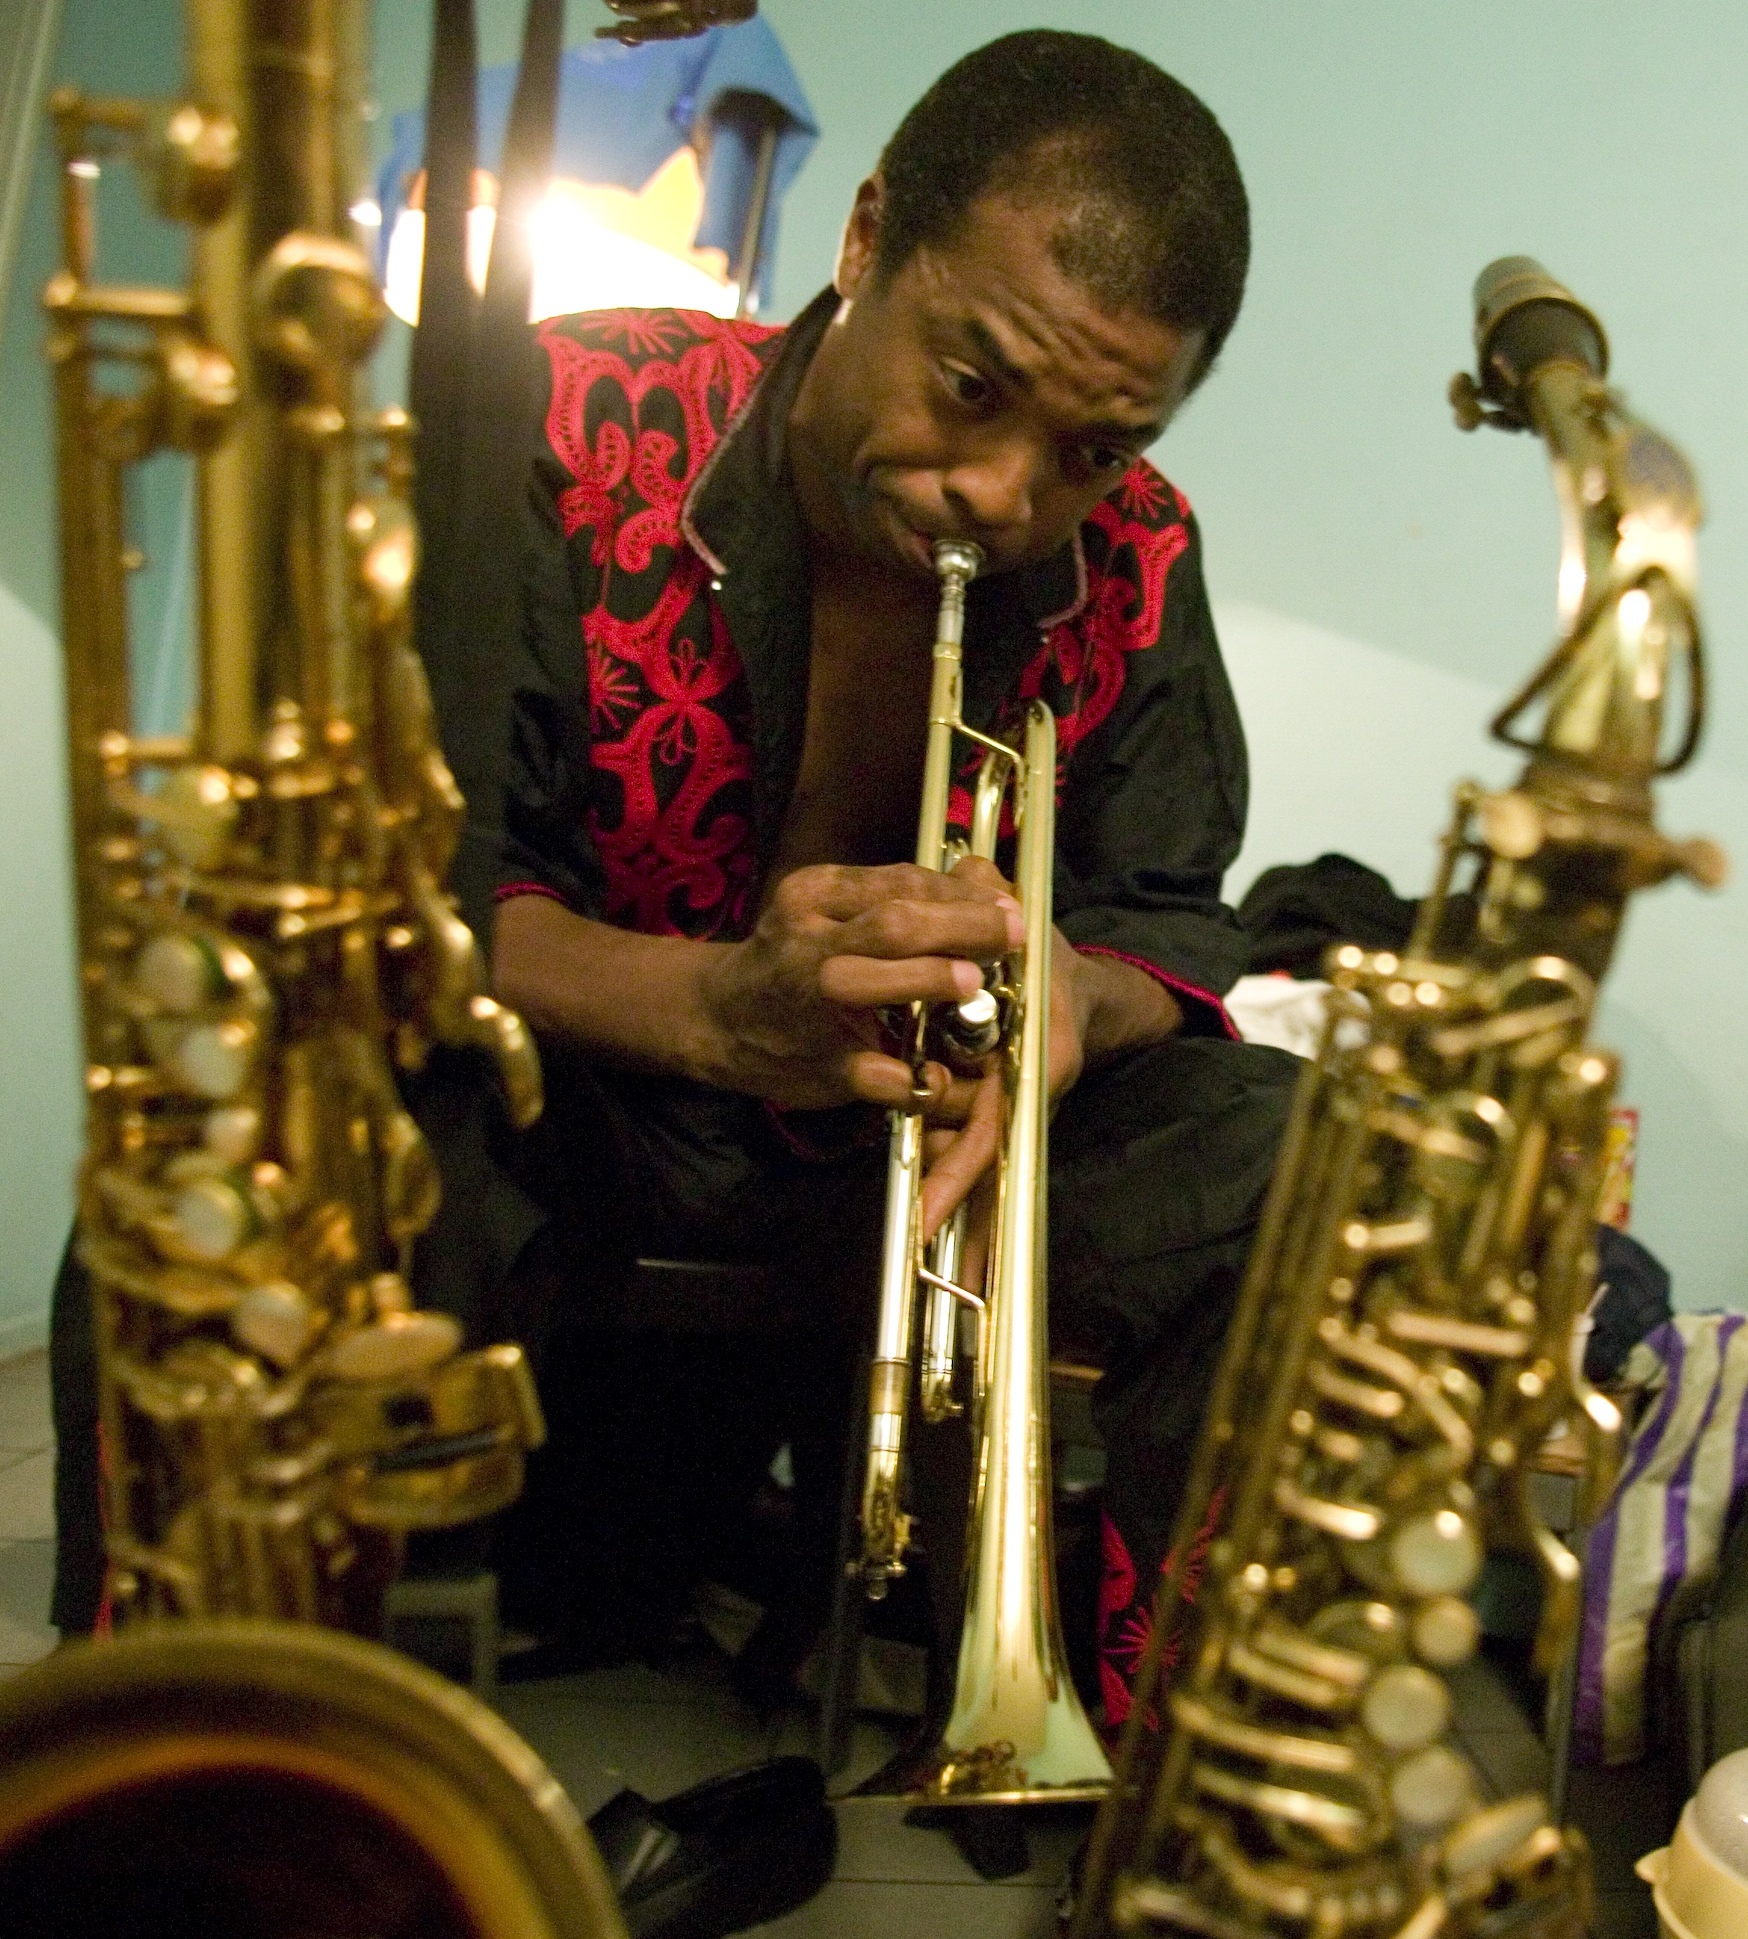 a man is playing his trumpet while he sits in the foreground